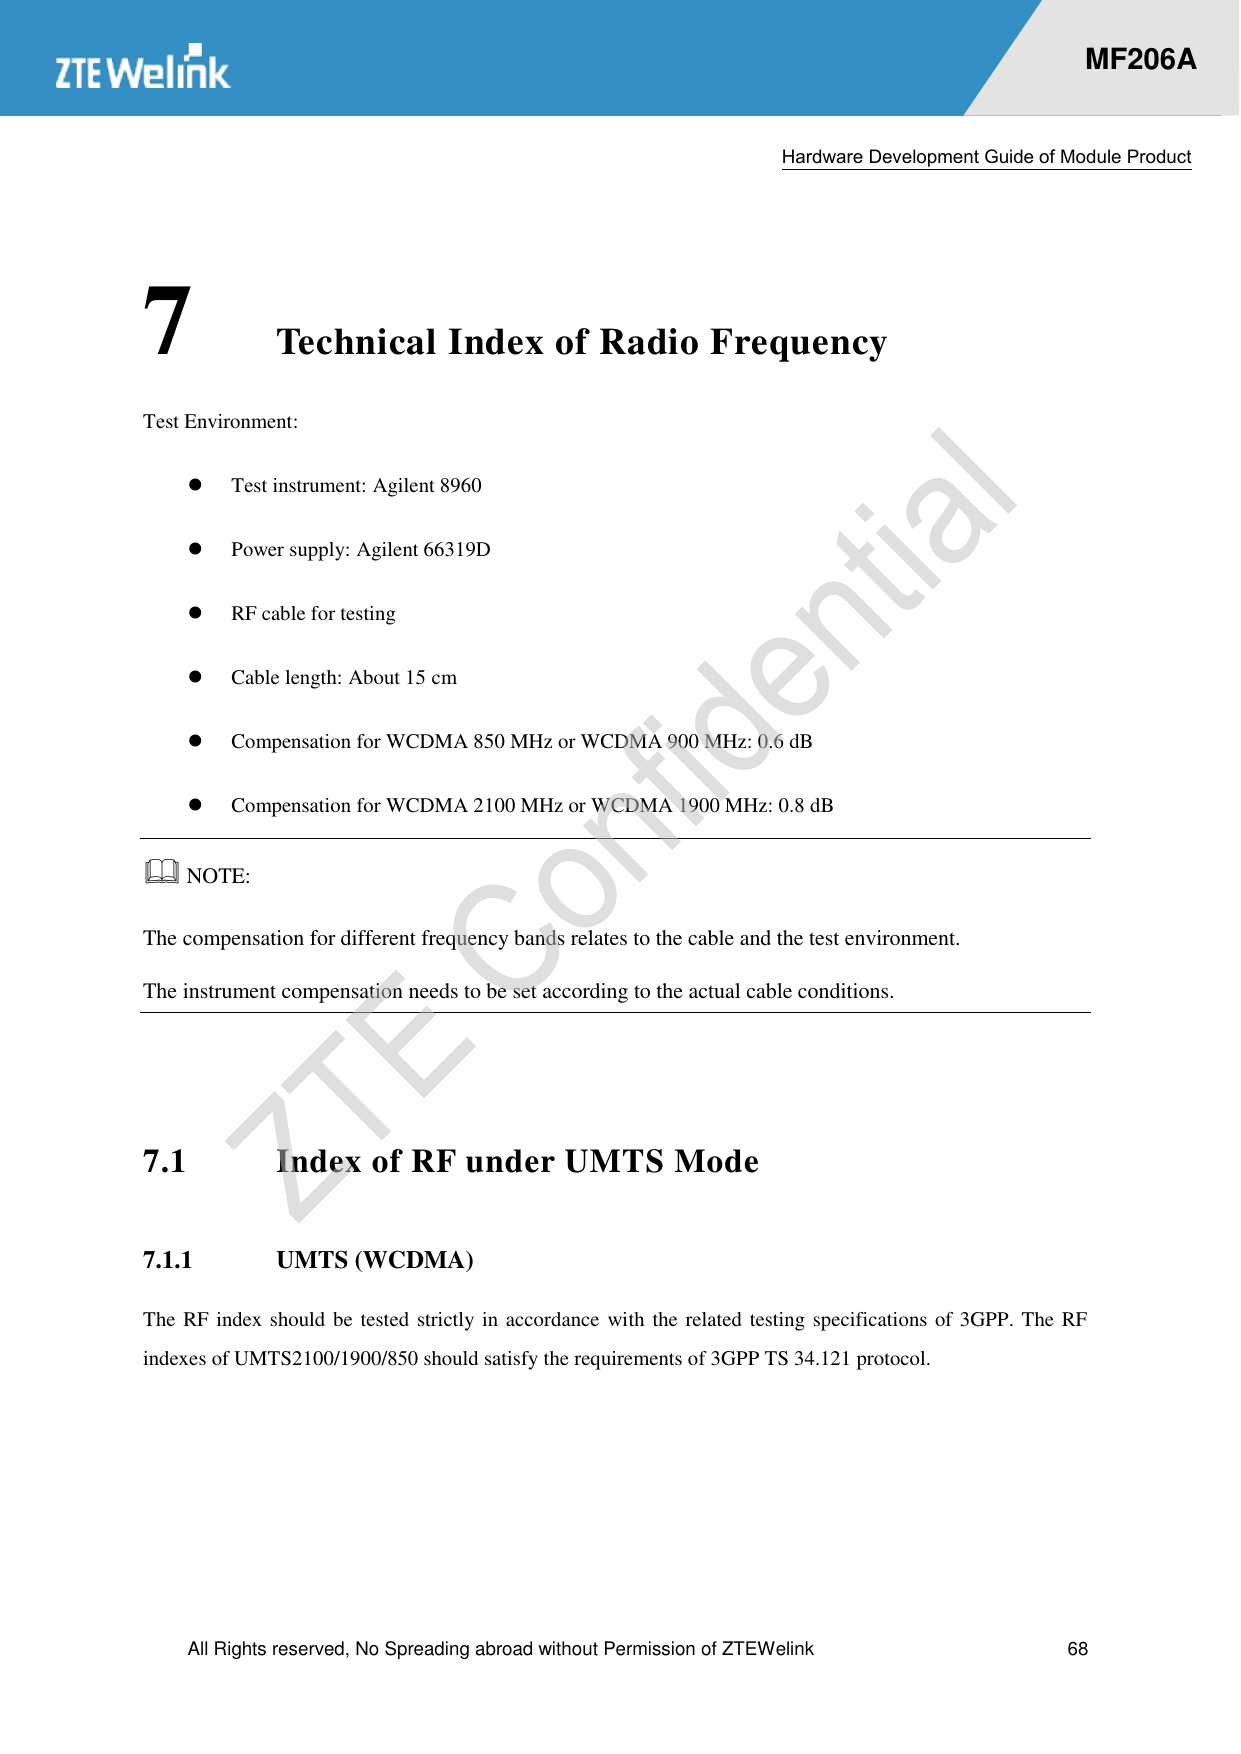  Hardware Development Guide of Module Product  All Rights reserved, No Spreading abroad without Permission of ZTEWelink  68    MF206A 7 Technical Index of Radio Frequency Test Environment:  Test instrument: Agilent 8960    Power supply: Agilent 66319D    RF cable for testing  Cable length: About 15 cm    Compensation for WCDMA 850 MHz or WCDMA 900 MHz: 0.6 dB    Compensation for WCDMA 2100 MHz or WCDMA 1900 MHz: 0.8 dB    NOTE:   The compensation for different frequency bands relates to the cable and the test environment. The instrument compensation needs to be set according to the actual cable conditions.  7.1 Index of RF under UMTS Mode 7.1.1 UMTS (WCDMA) The RF index should be tested strictly in accordance with the related testing specifications of 3GPP. The RF indexes of UMTS2100/1900/850 should satisfy the requirements of 3GPP TS 34.121 protocol.    